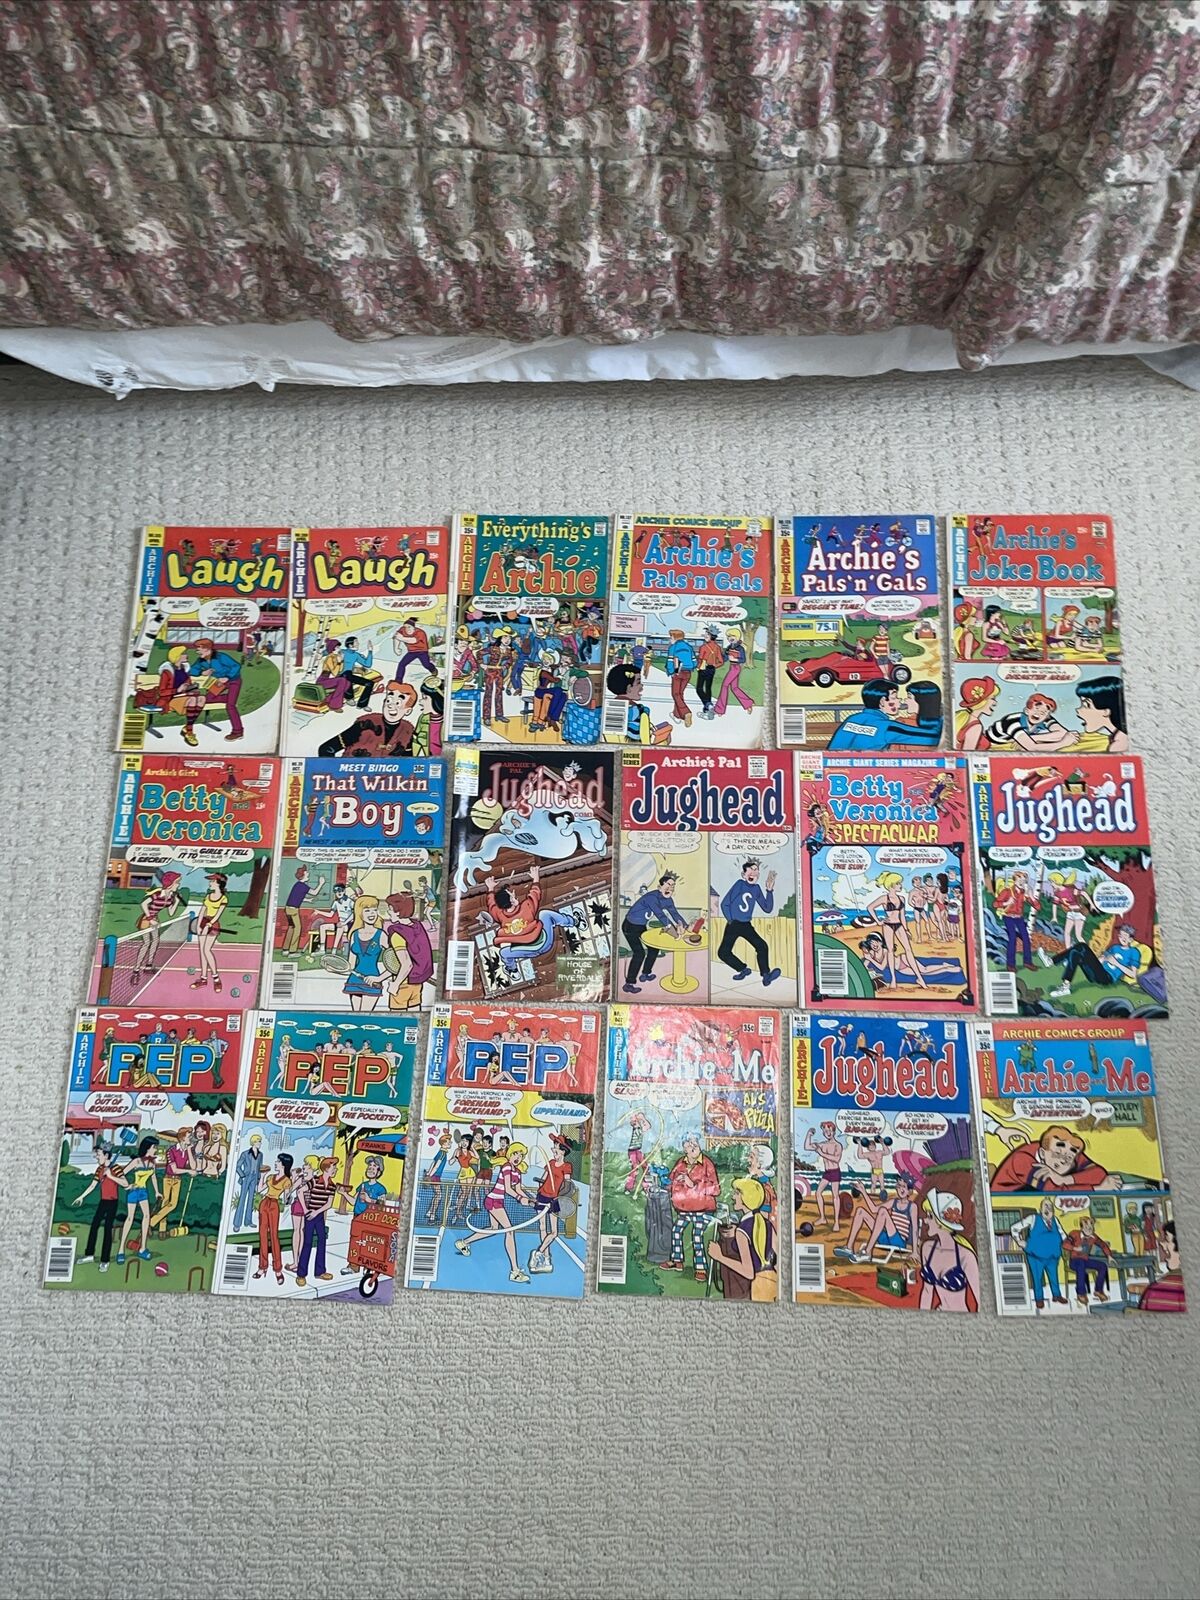 Archie’s Series Vintage Mixed Editions Magazines Lot of 18 MRA#14